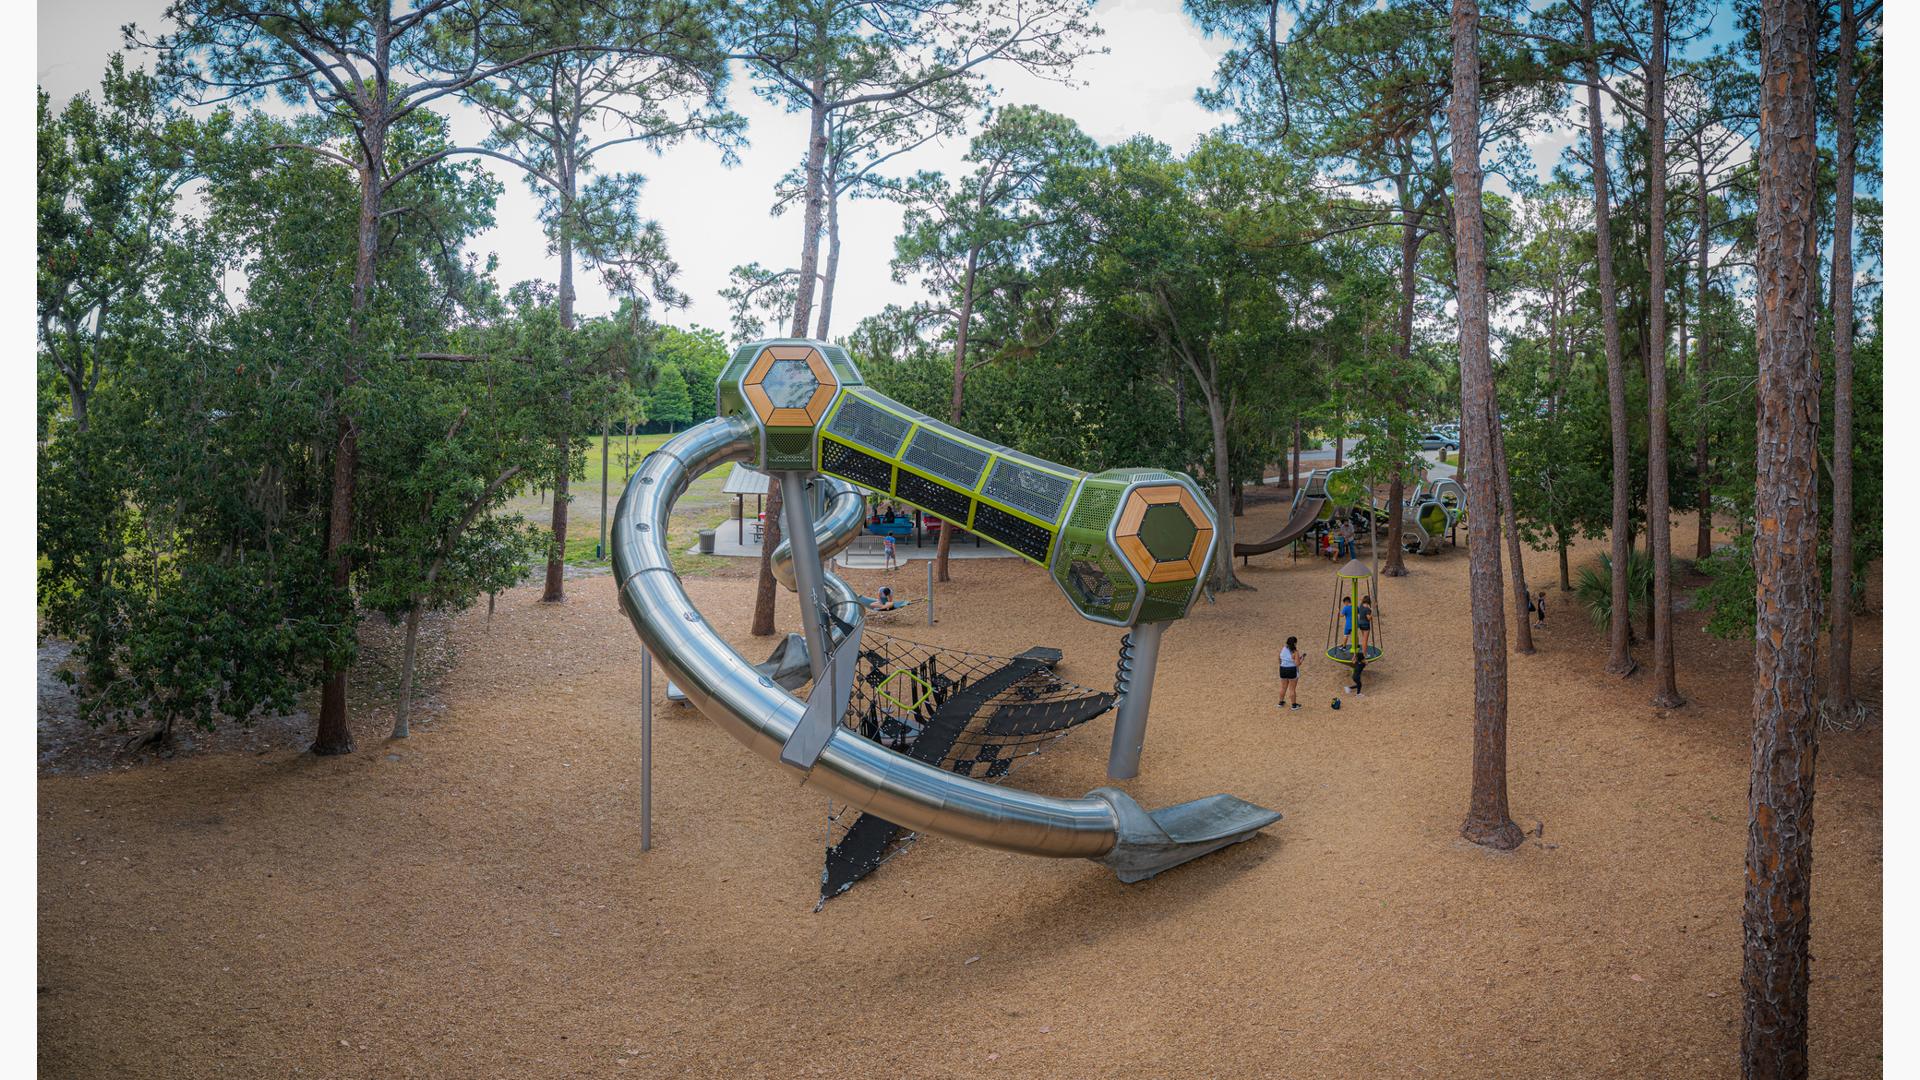 Two tower structures with hexagonal play pods are connected by a enclosed crawl tunnel and tubular stainless steel slides. Tall trees surround the play area.  